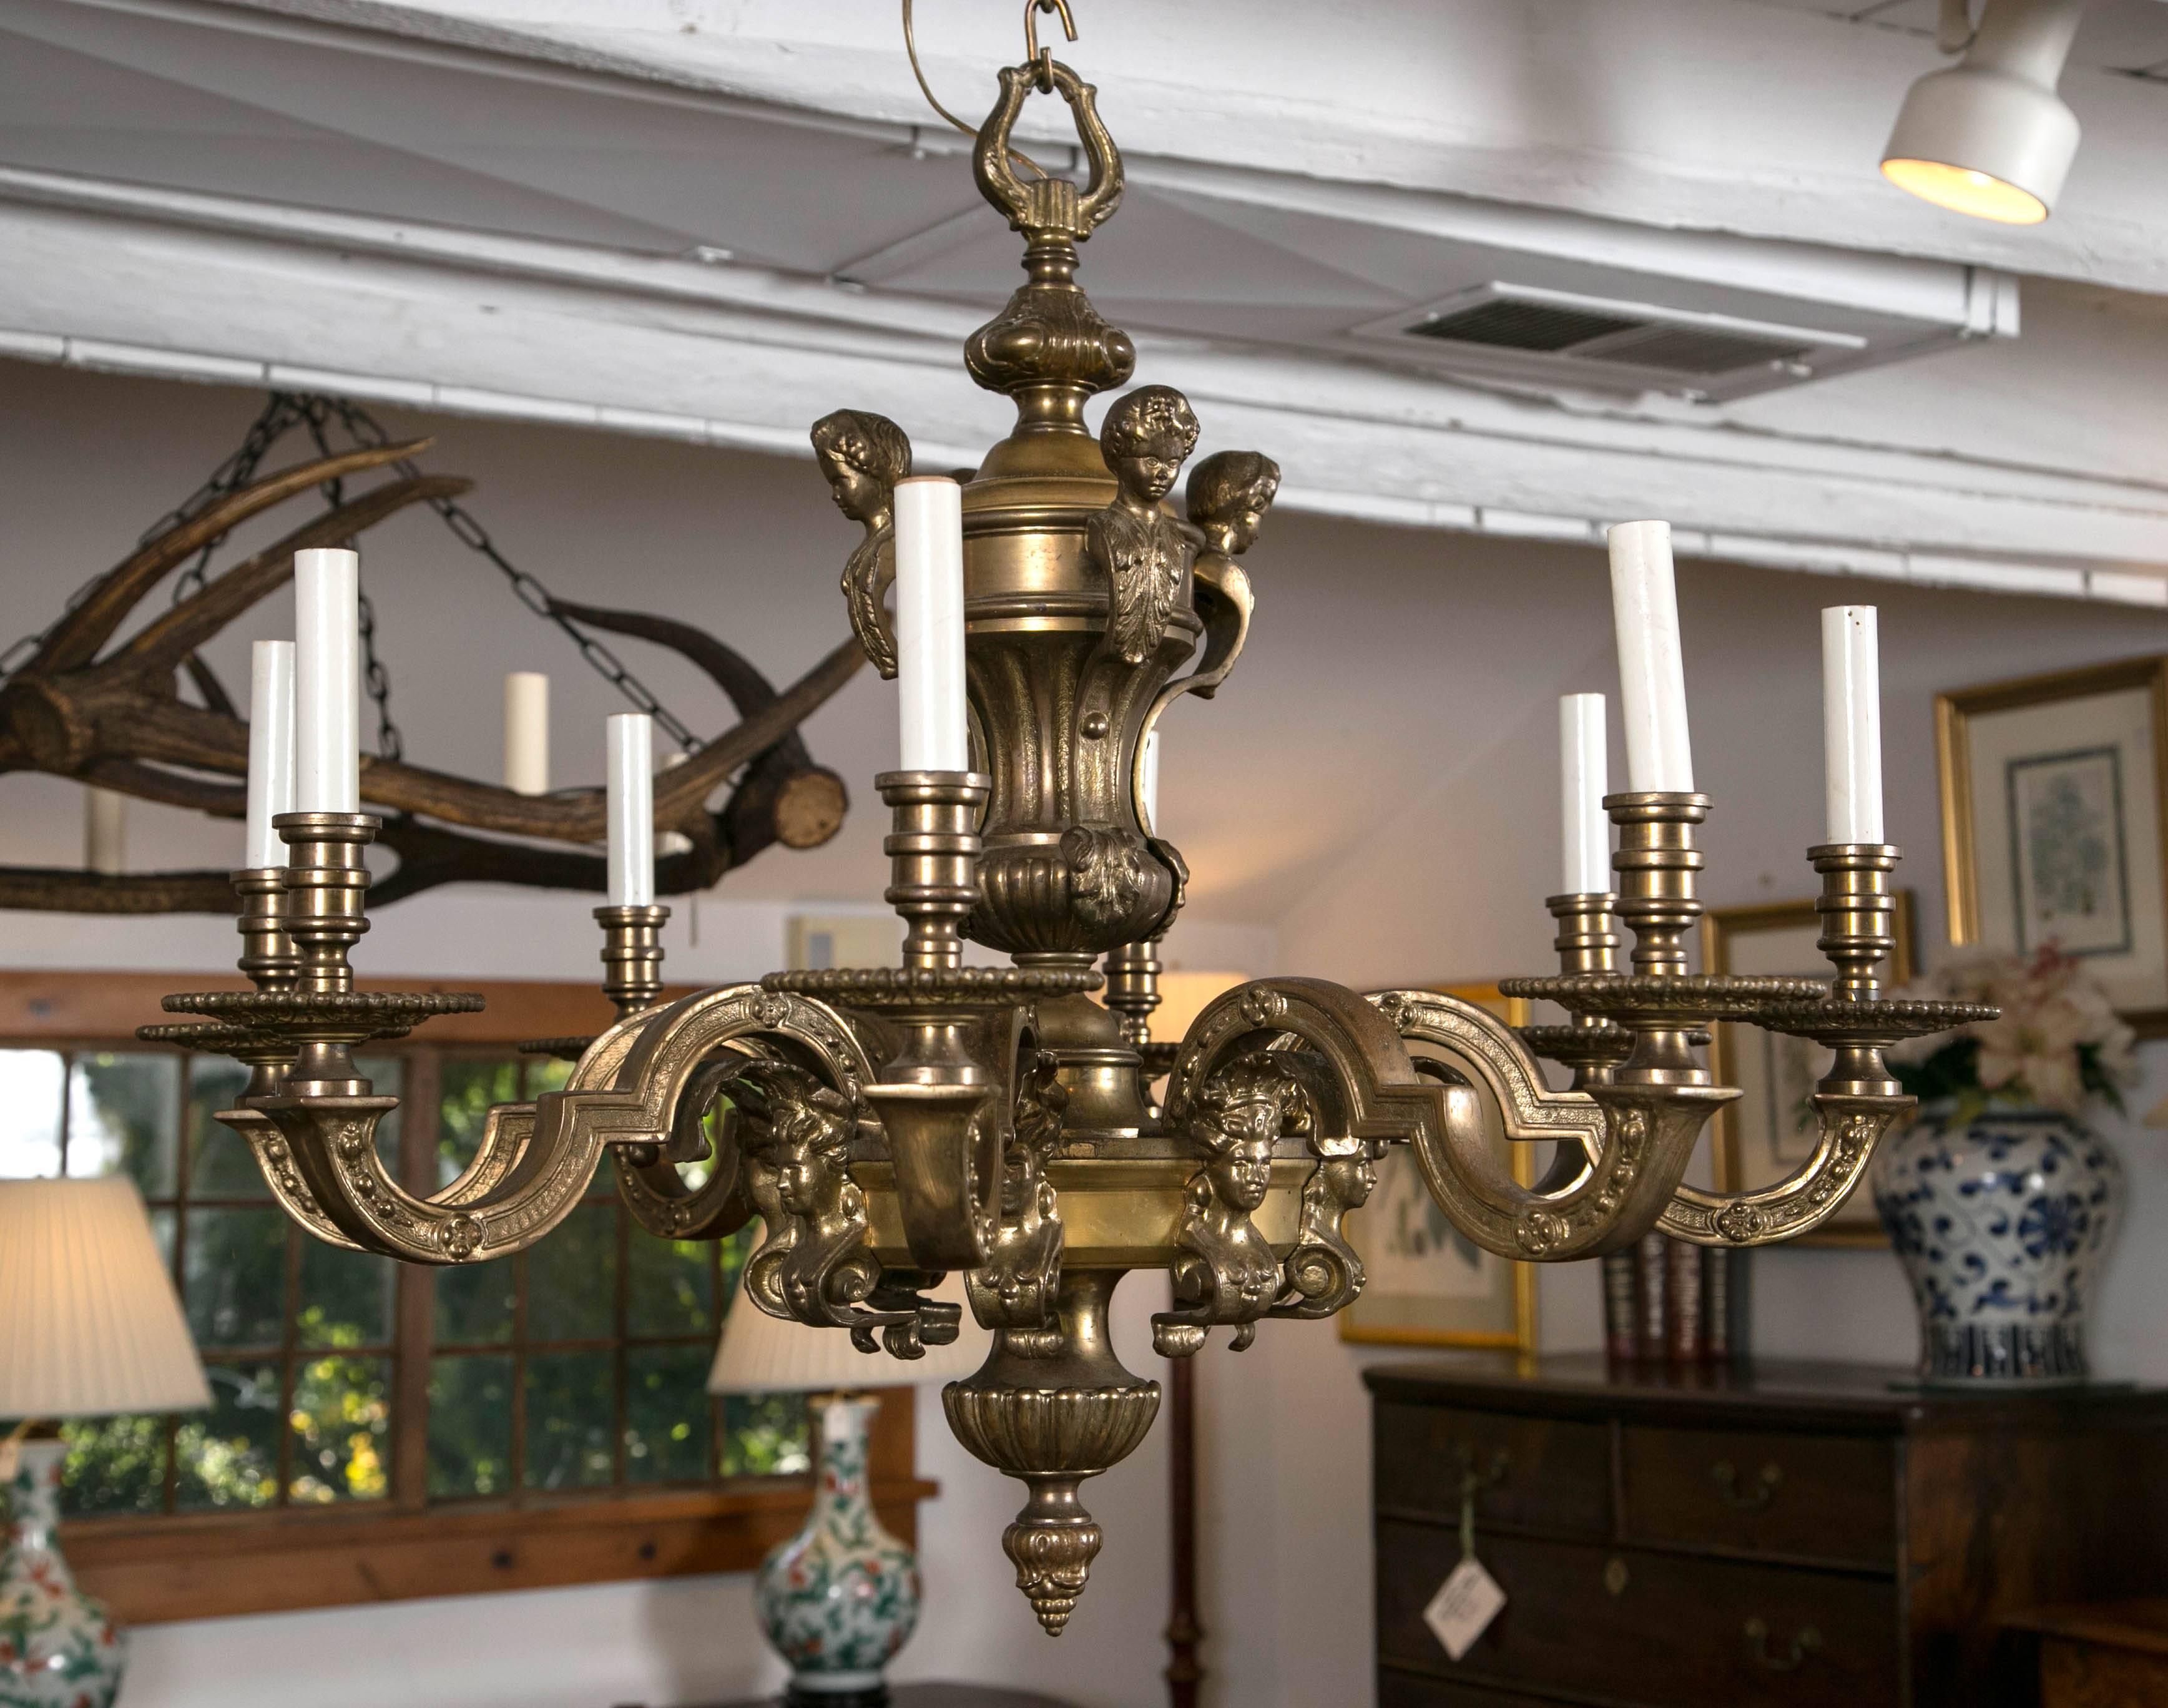 Festooned with busts above and below its bold, architectural arms, this chandelier puts the classic in neoclassic. The eight arms radiating from a central disk and the urn post above leads the eye up to a magnificent lyre-shaped connecting hook.